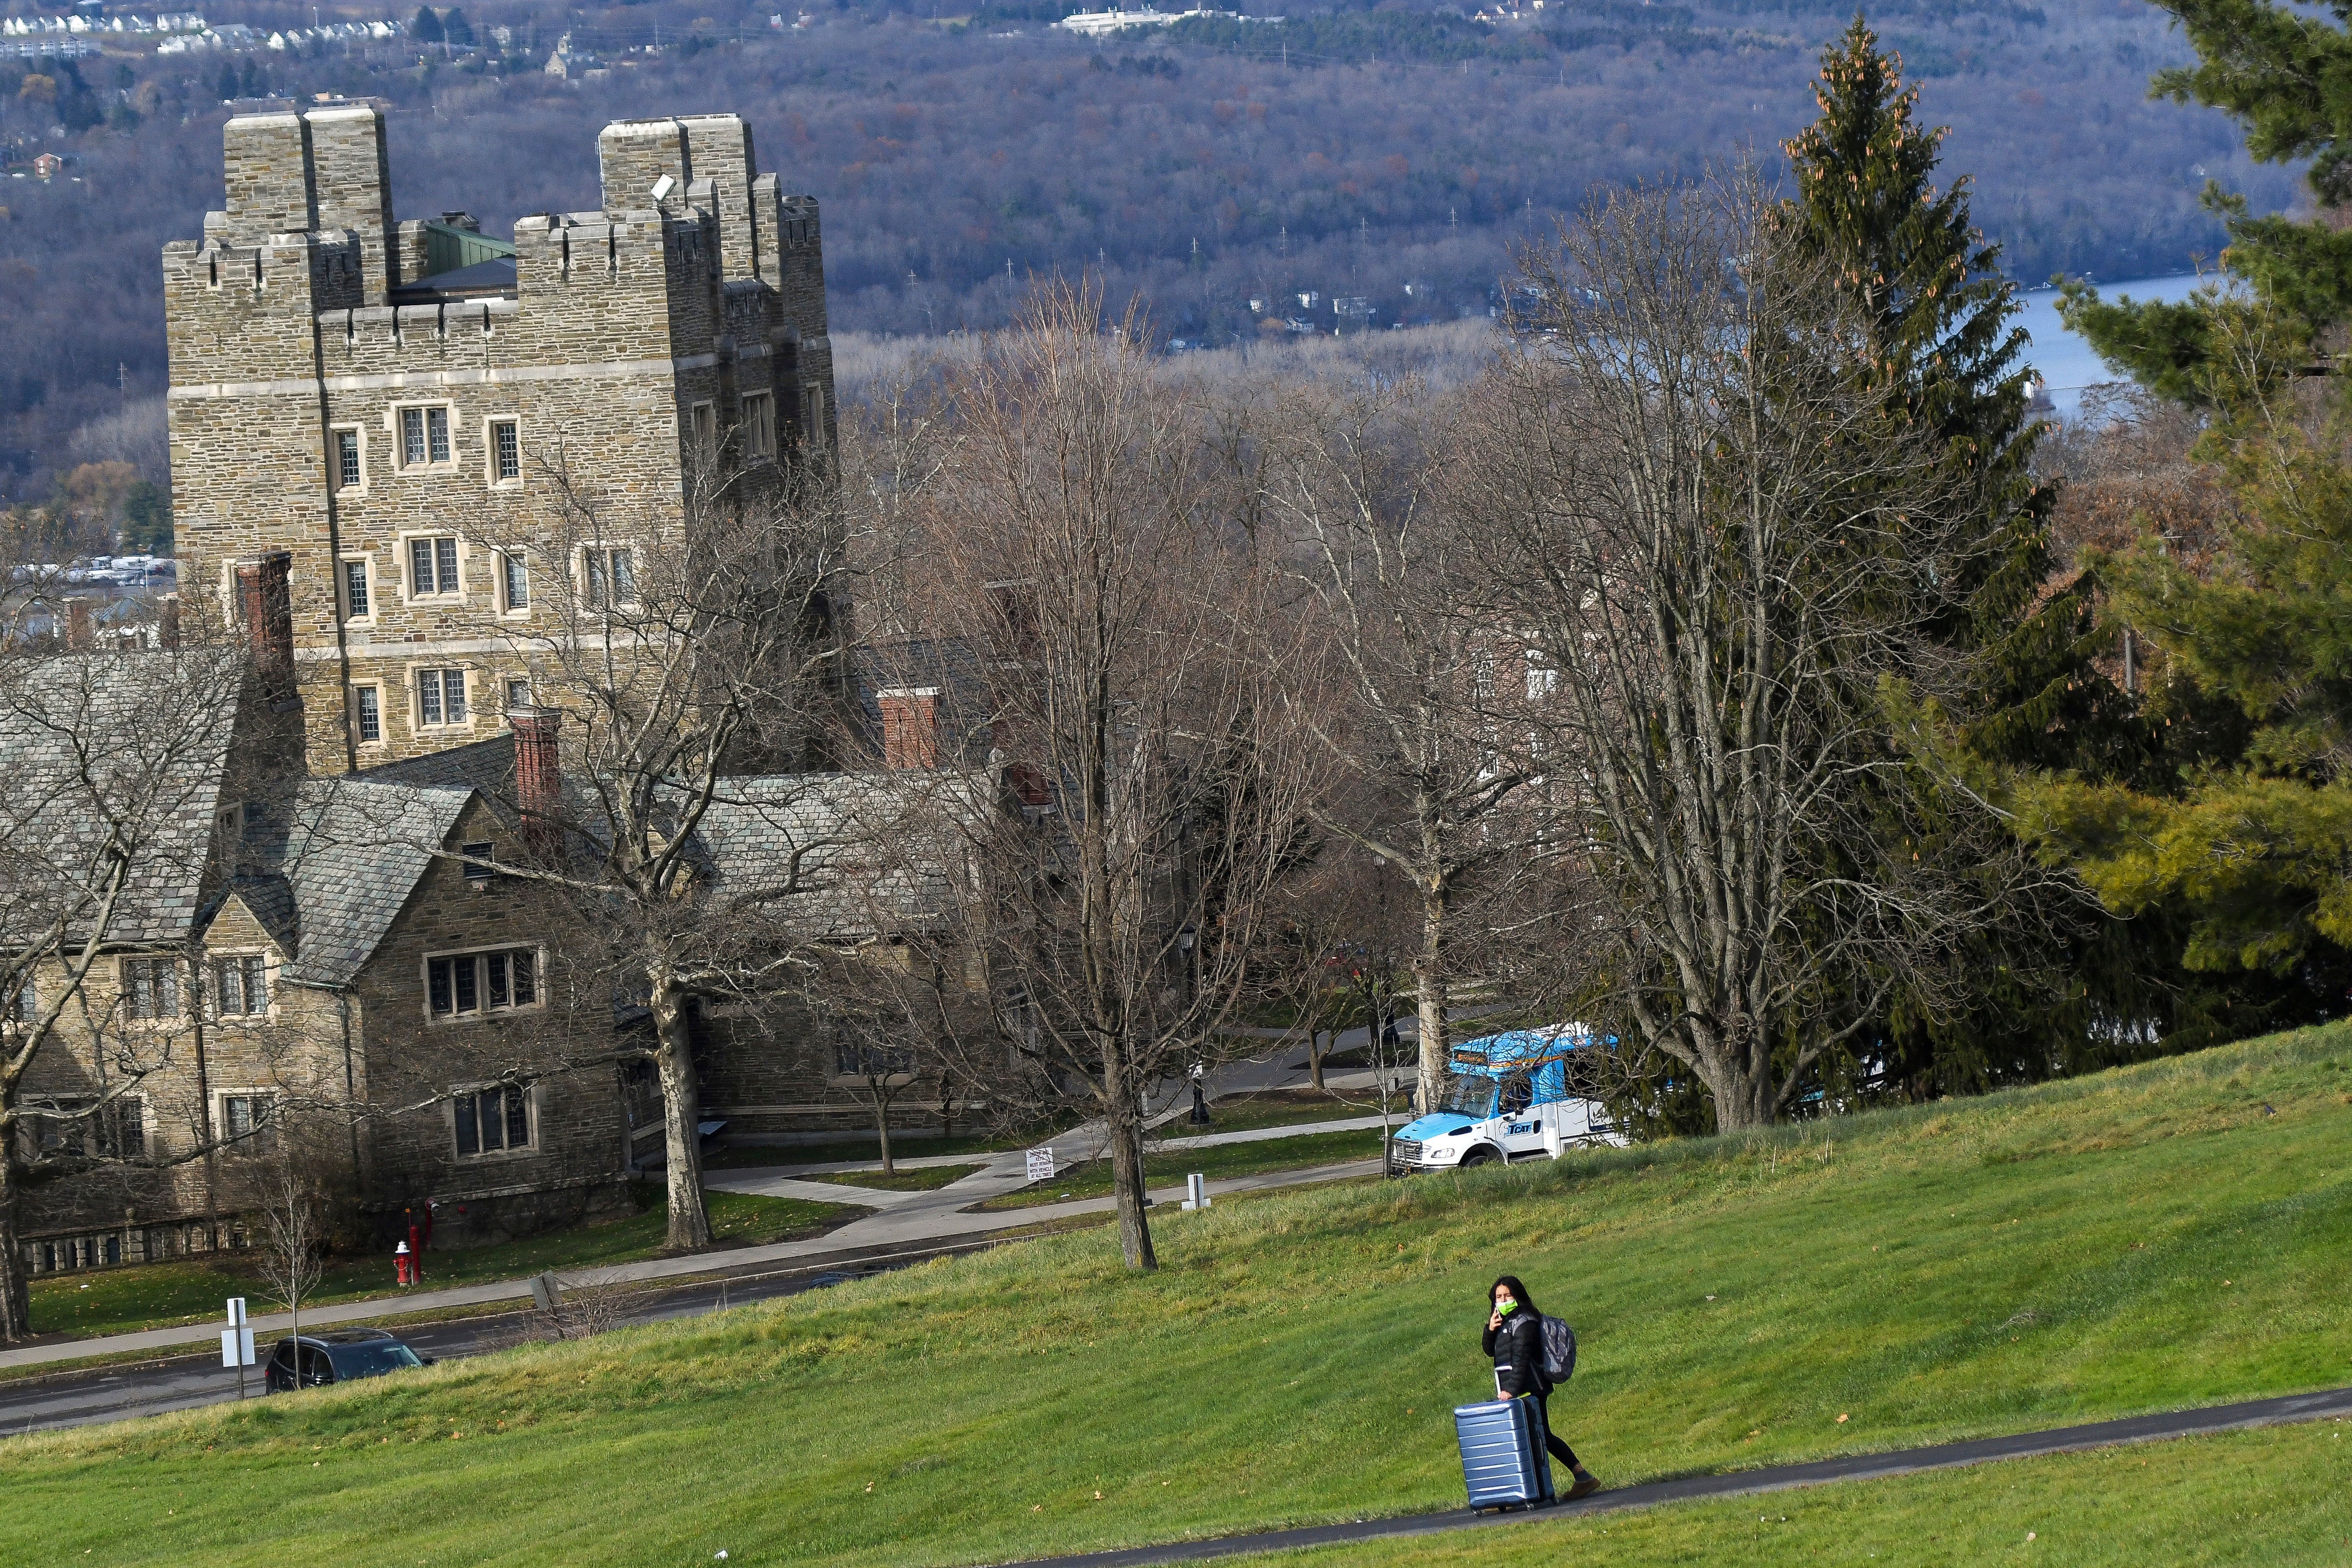 A Cornell University student walks along the campus in Ithaca, N.Y., on Dec. 16, 2021